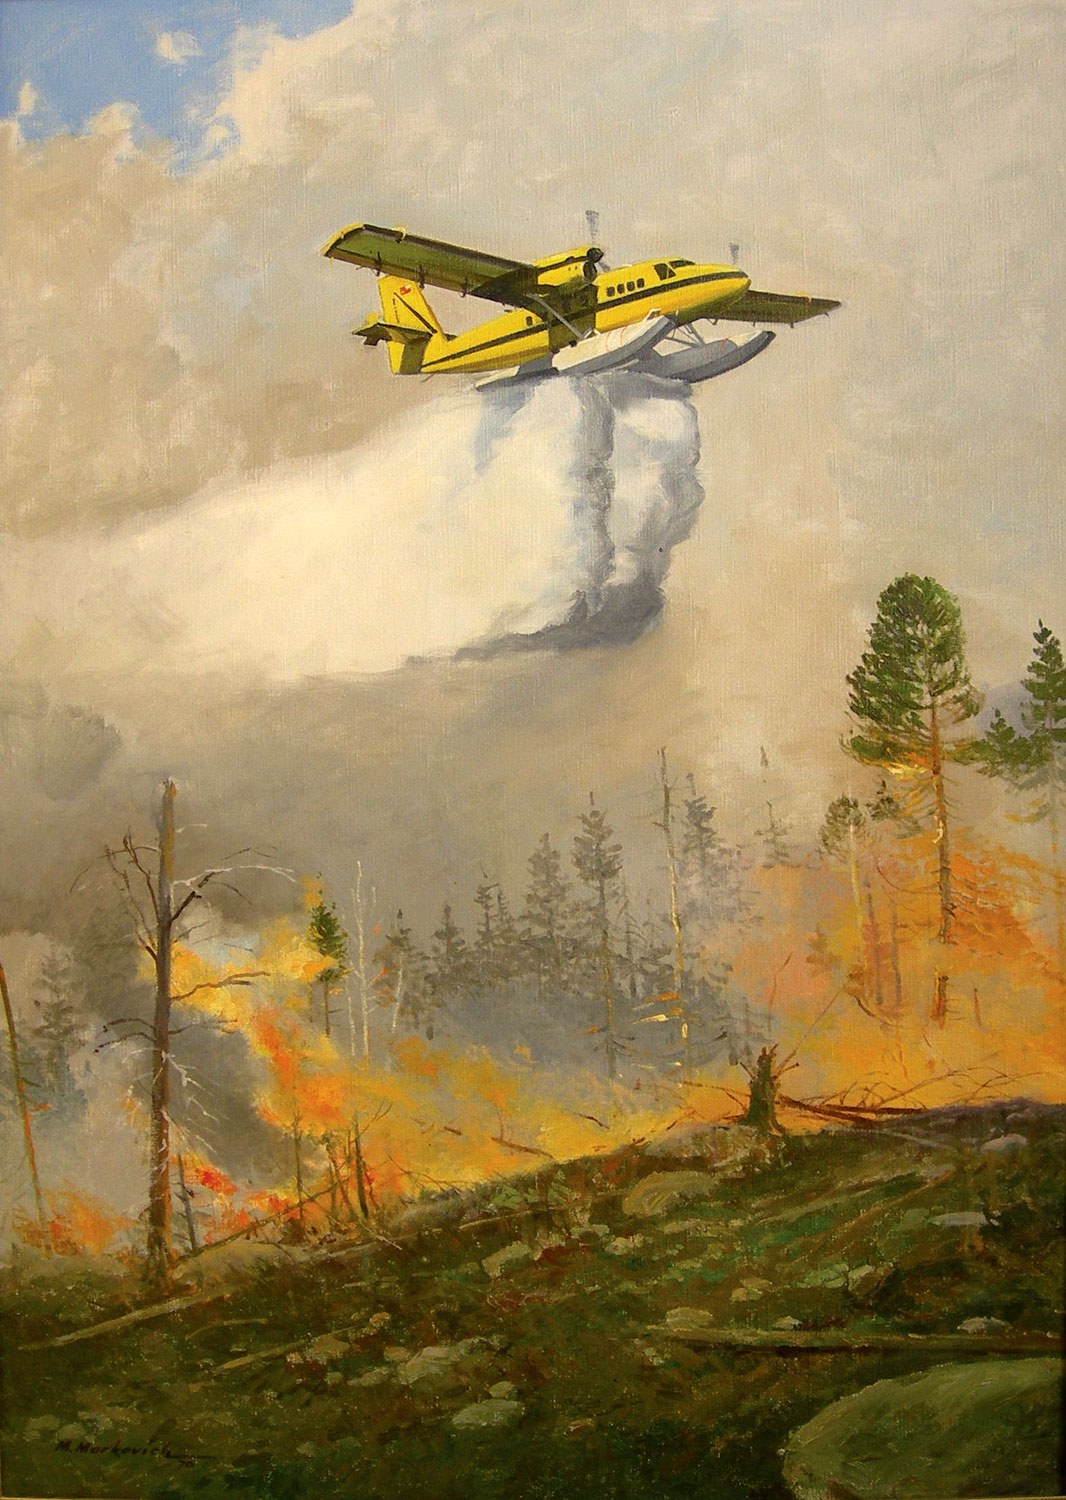 Water Bombing, 1970, by Moma Markovich. Oil on canvas, 90.8 x 65.4 cm. Government of Ontario Art Collection, Archives of Ontario, 636457.